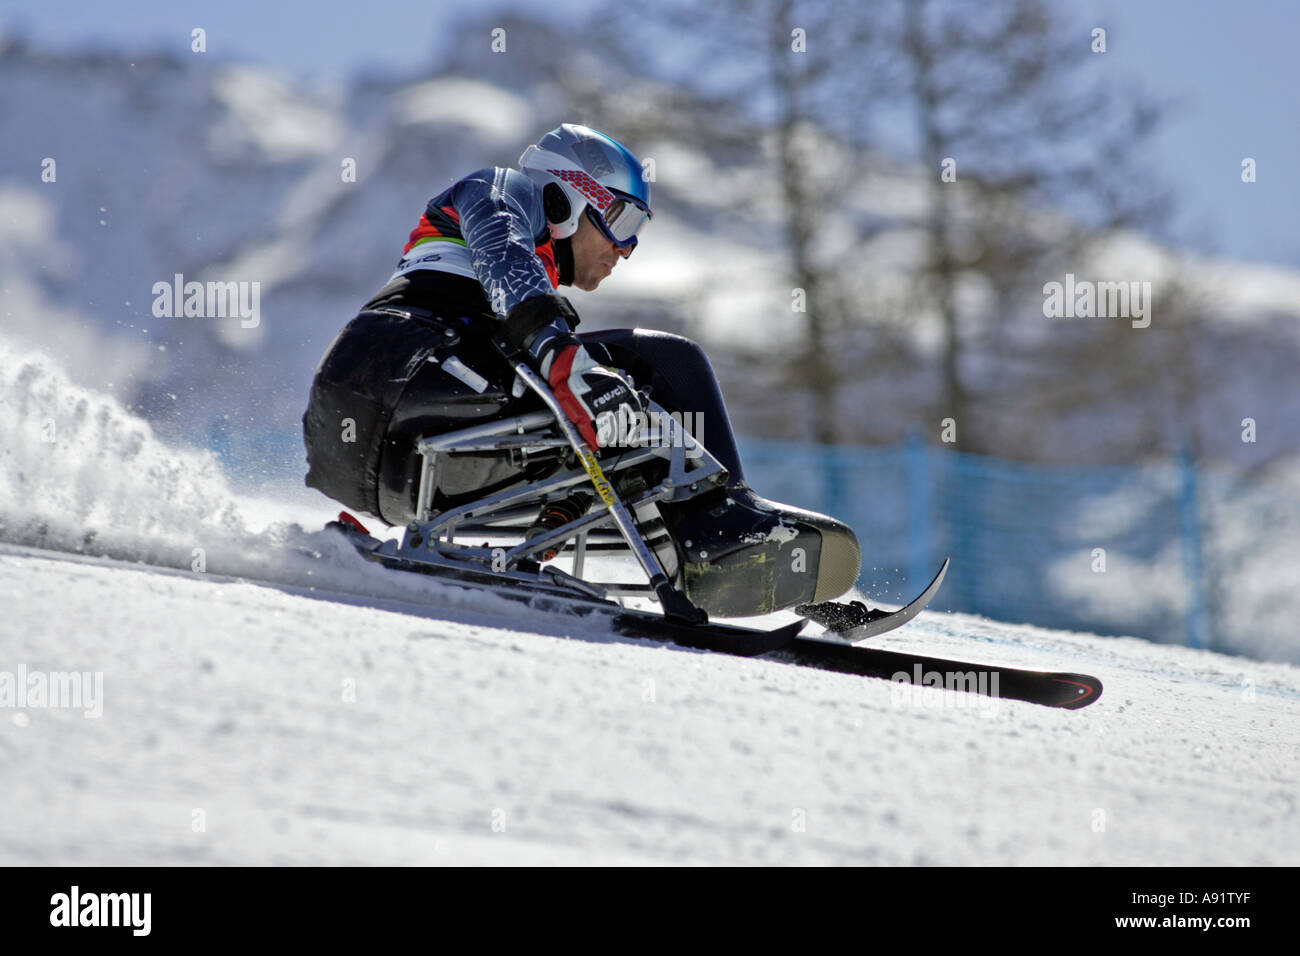 Nick Catanzarite LW10 1 of the USA in the Mens Alpine Skiing Super G Sitting competition Stock Photo